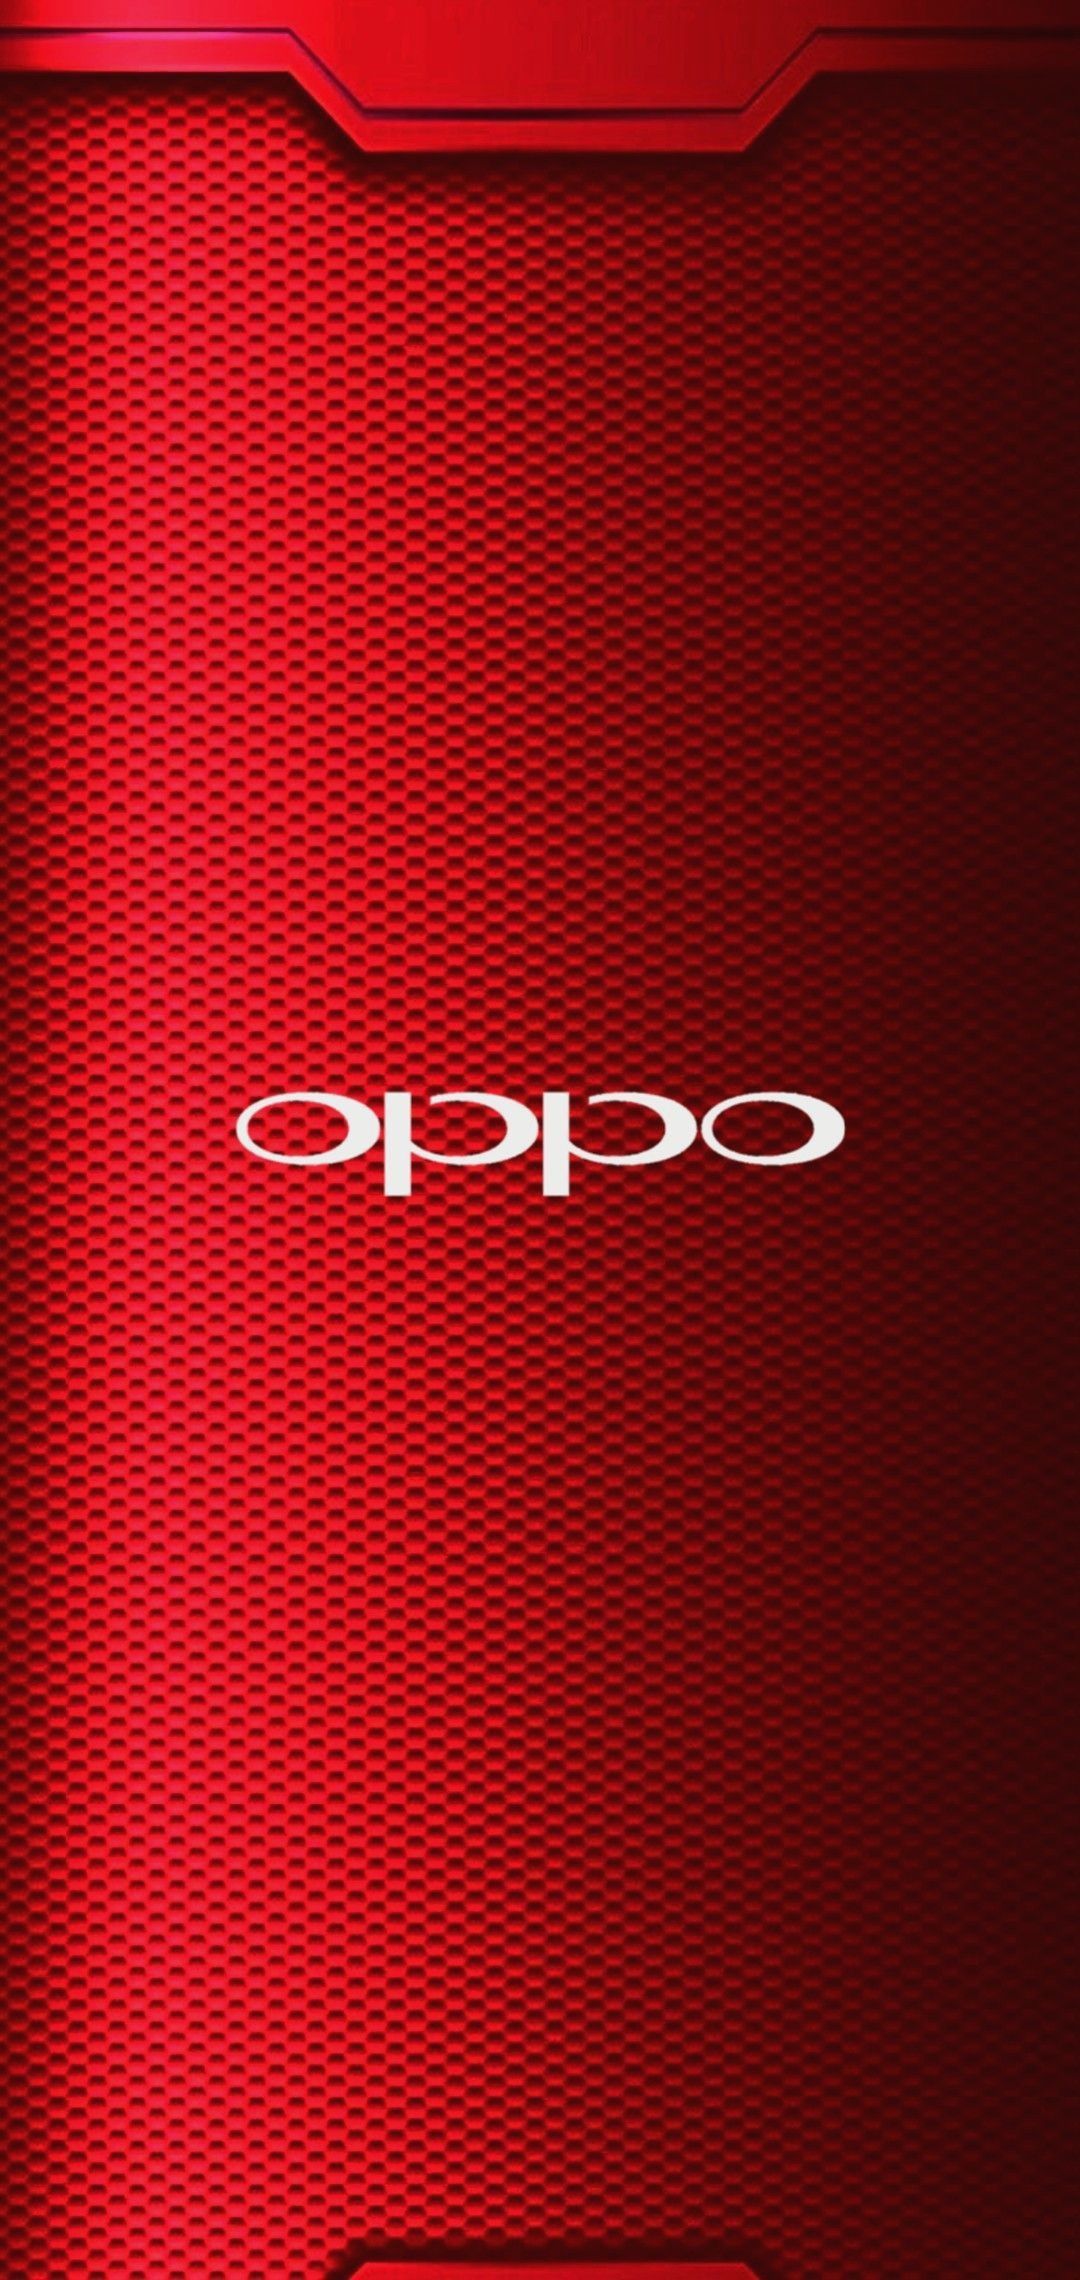 Oppo A37 Wallpaper Free Oppo A37 Background